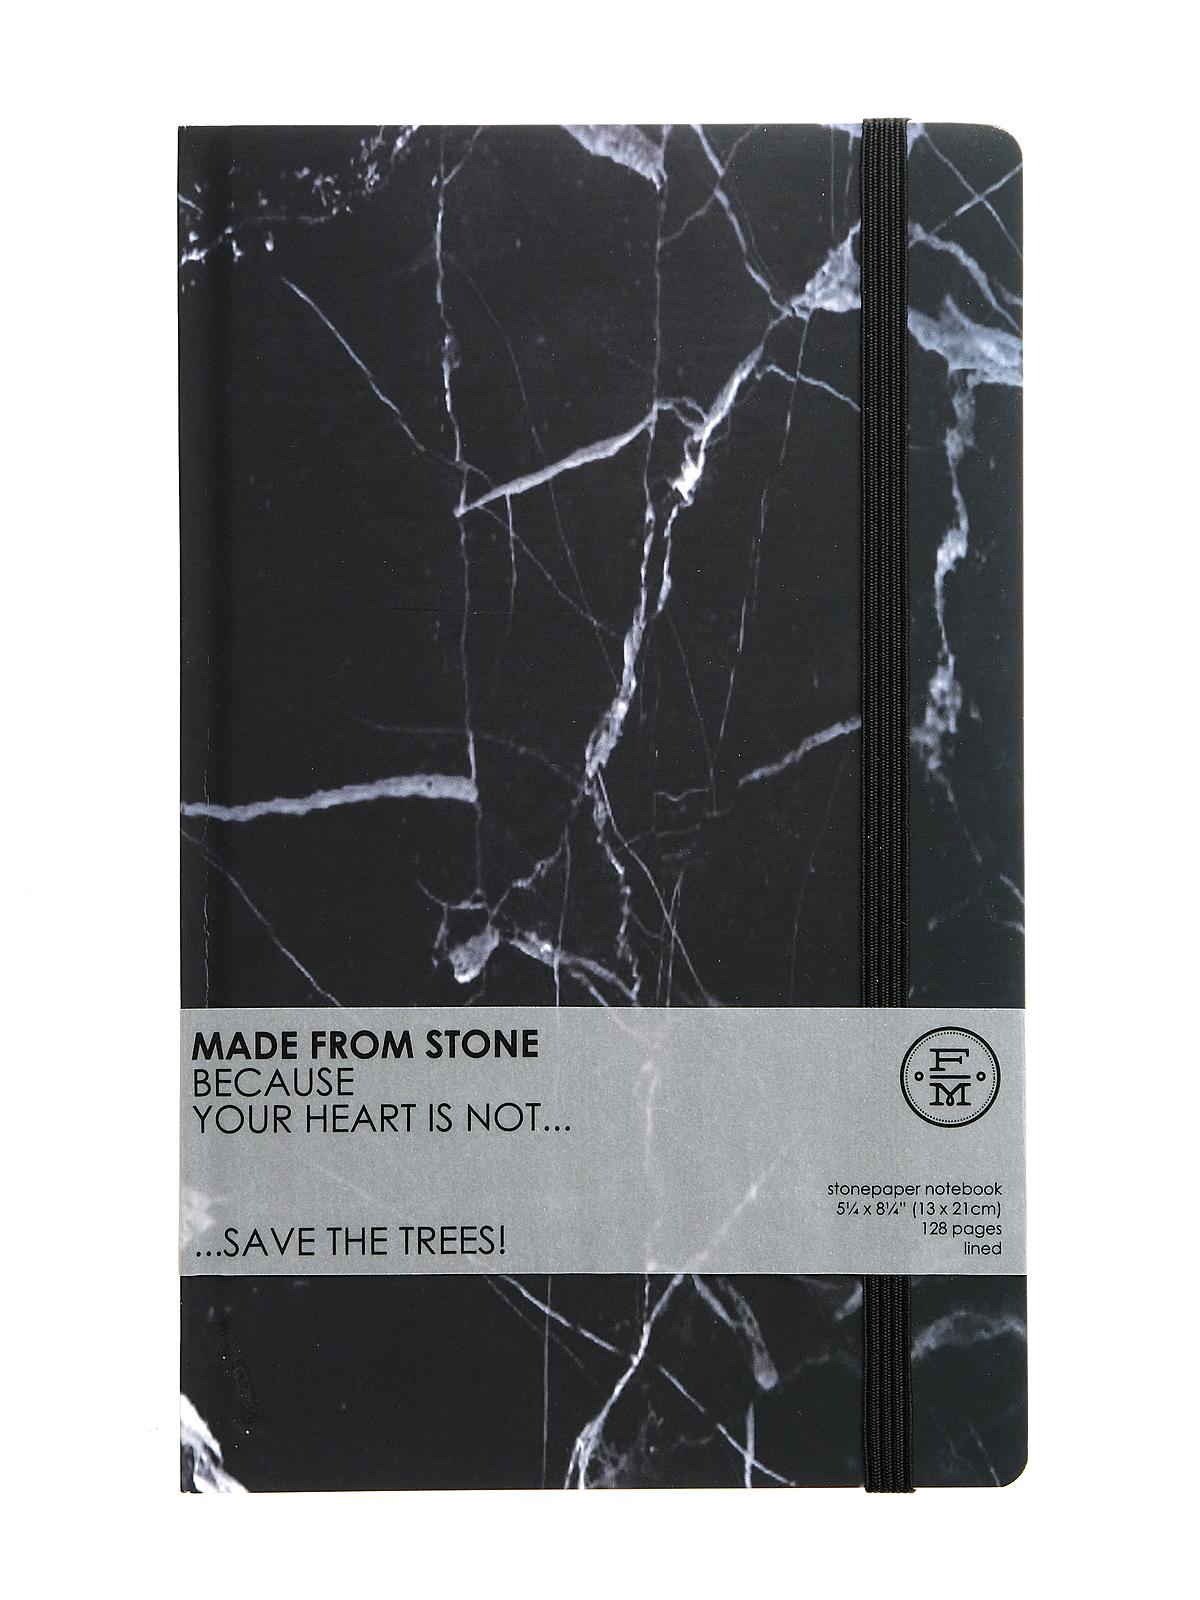 Stonepaper Notebooks Onyx 5 1 4 In. X 8 1 4 In. 128 Pages, Lined